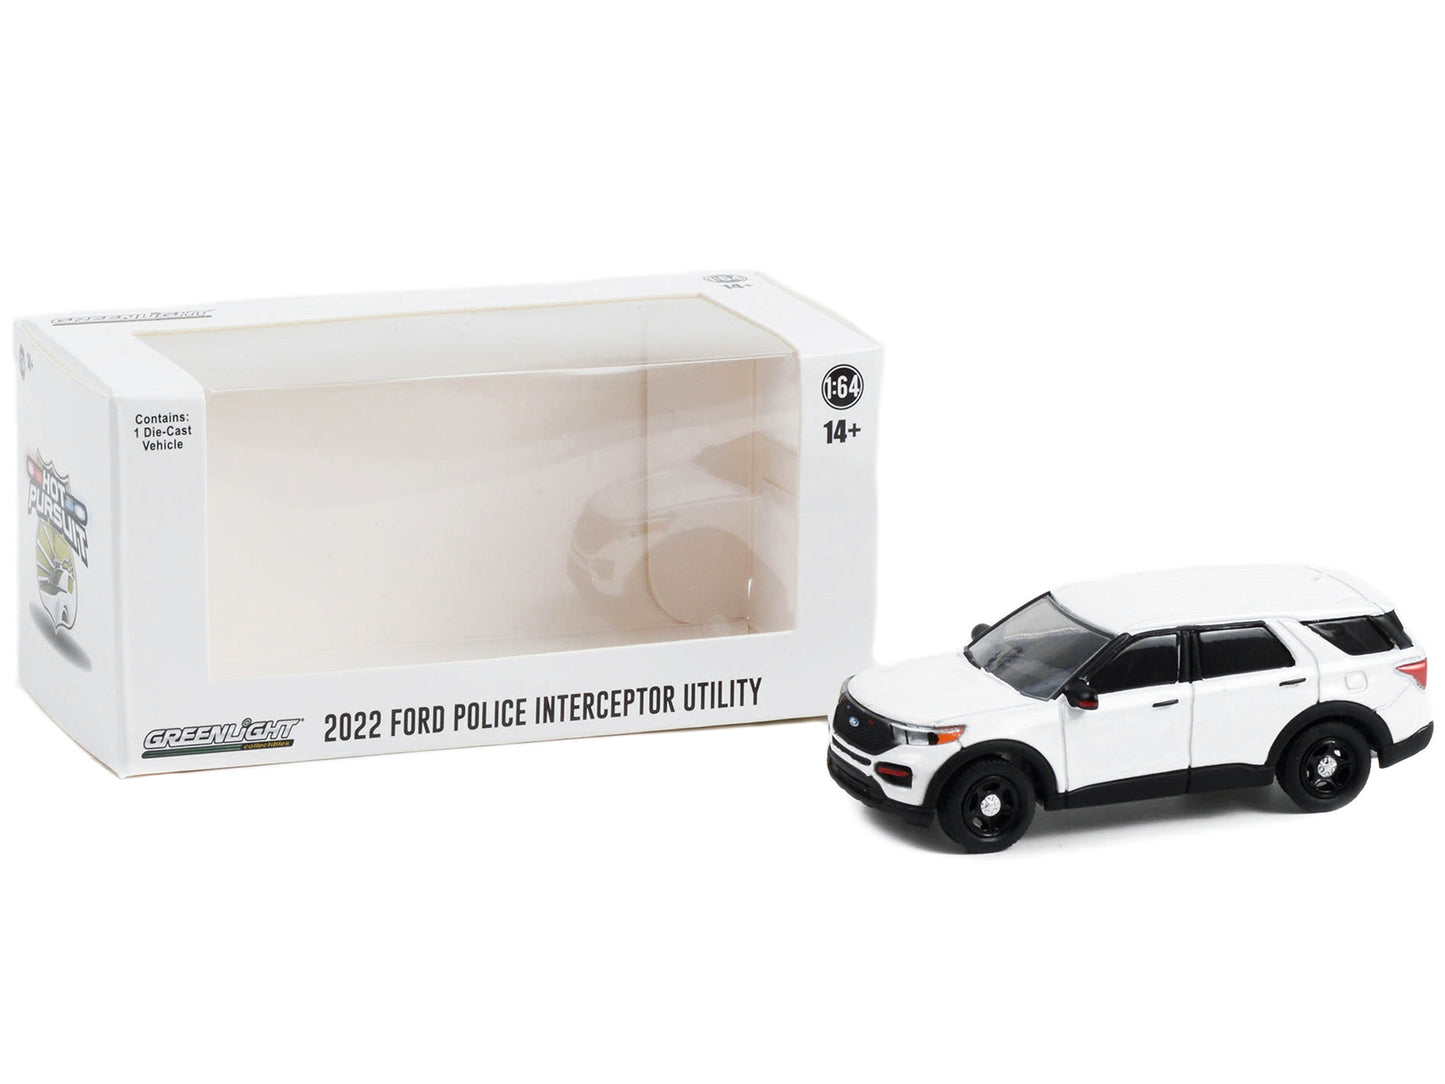 2022 Ford Police Interceptor Utility White "Hot Pursuit" "Hobby Exclusive" Series 1/64 Diecast Model Car by Greenlight